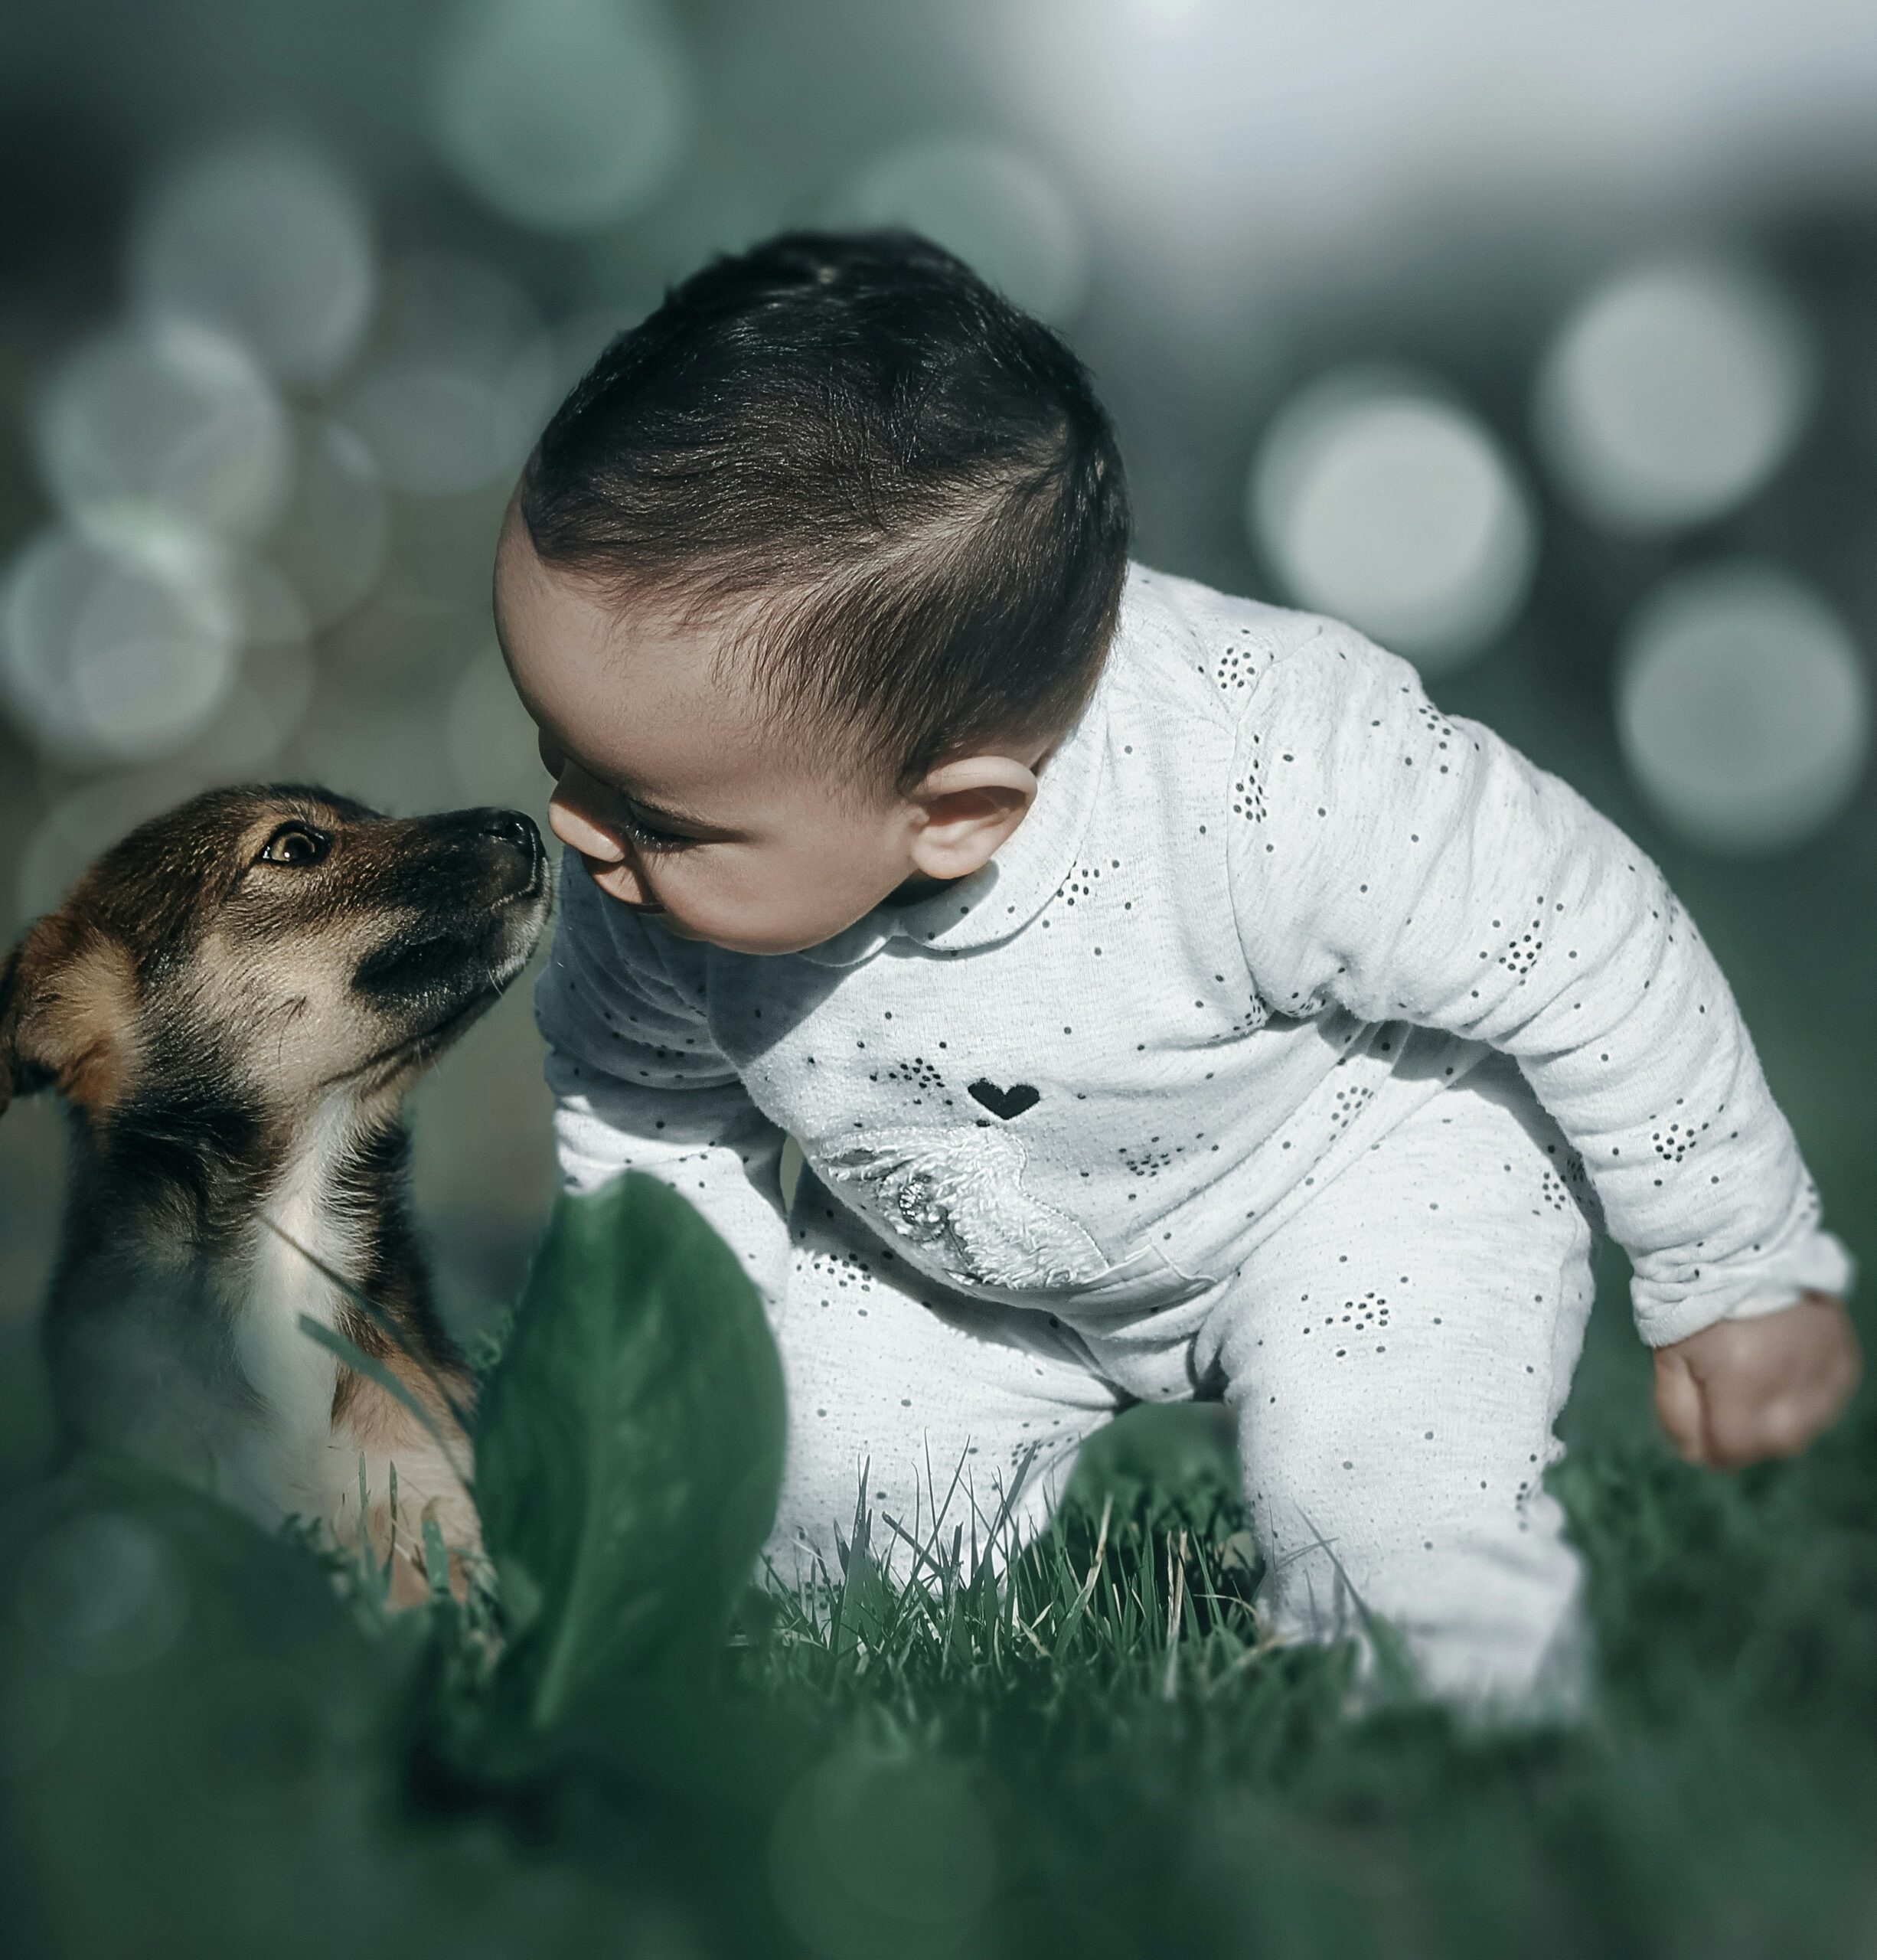 Navigating the Dog-Baby Dynamic: Tips for a Harmonious Relationship